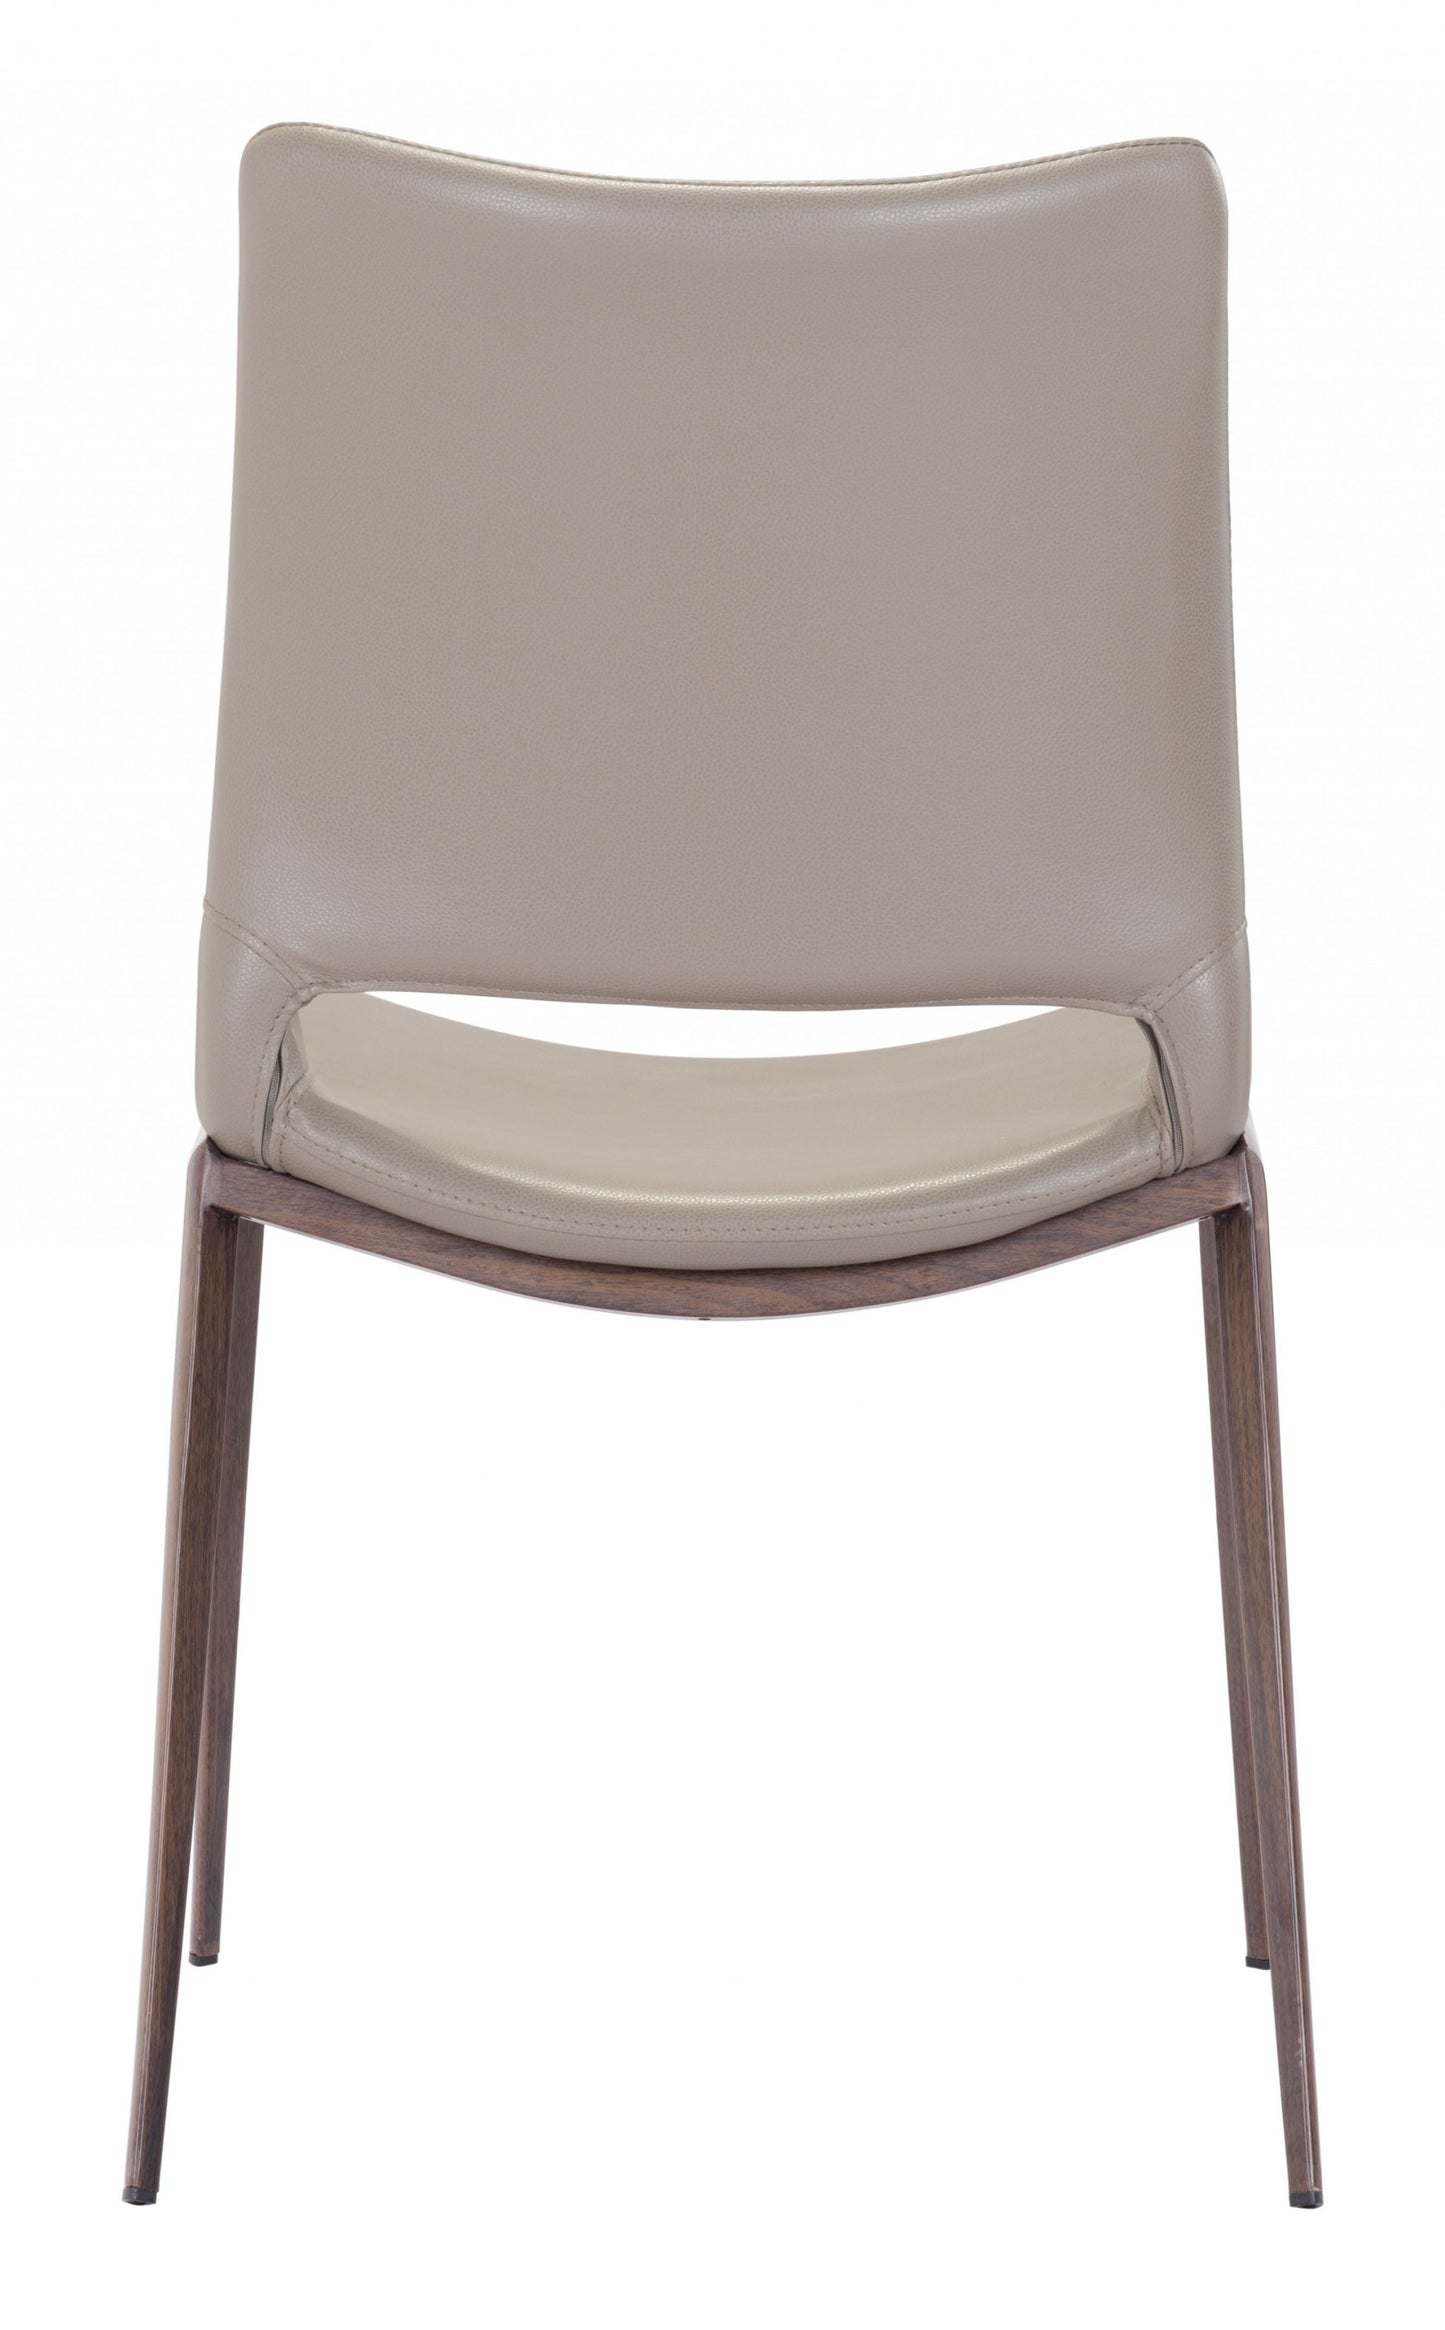 Set of Two Gray Faux Leather and Espresso Mod Ergo Dining Chairs